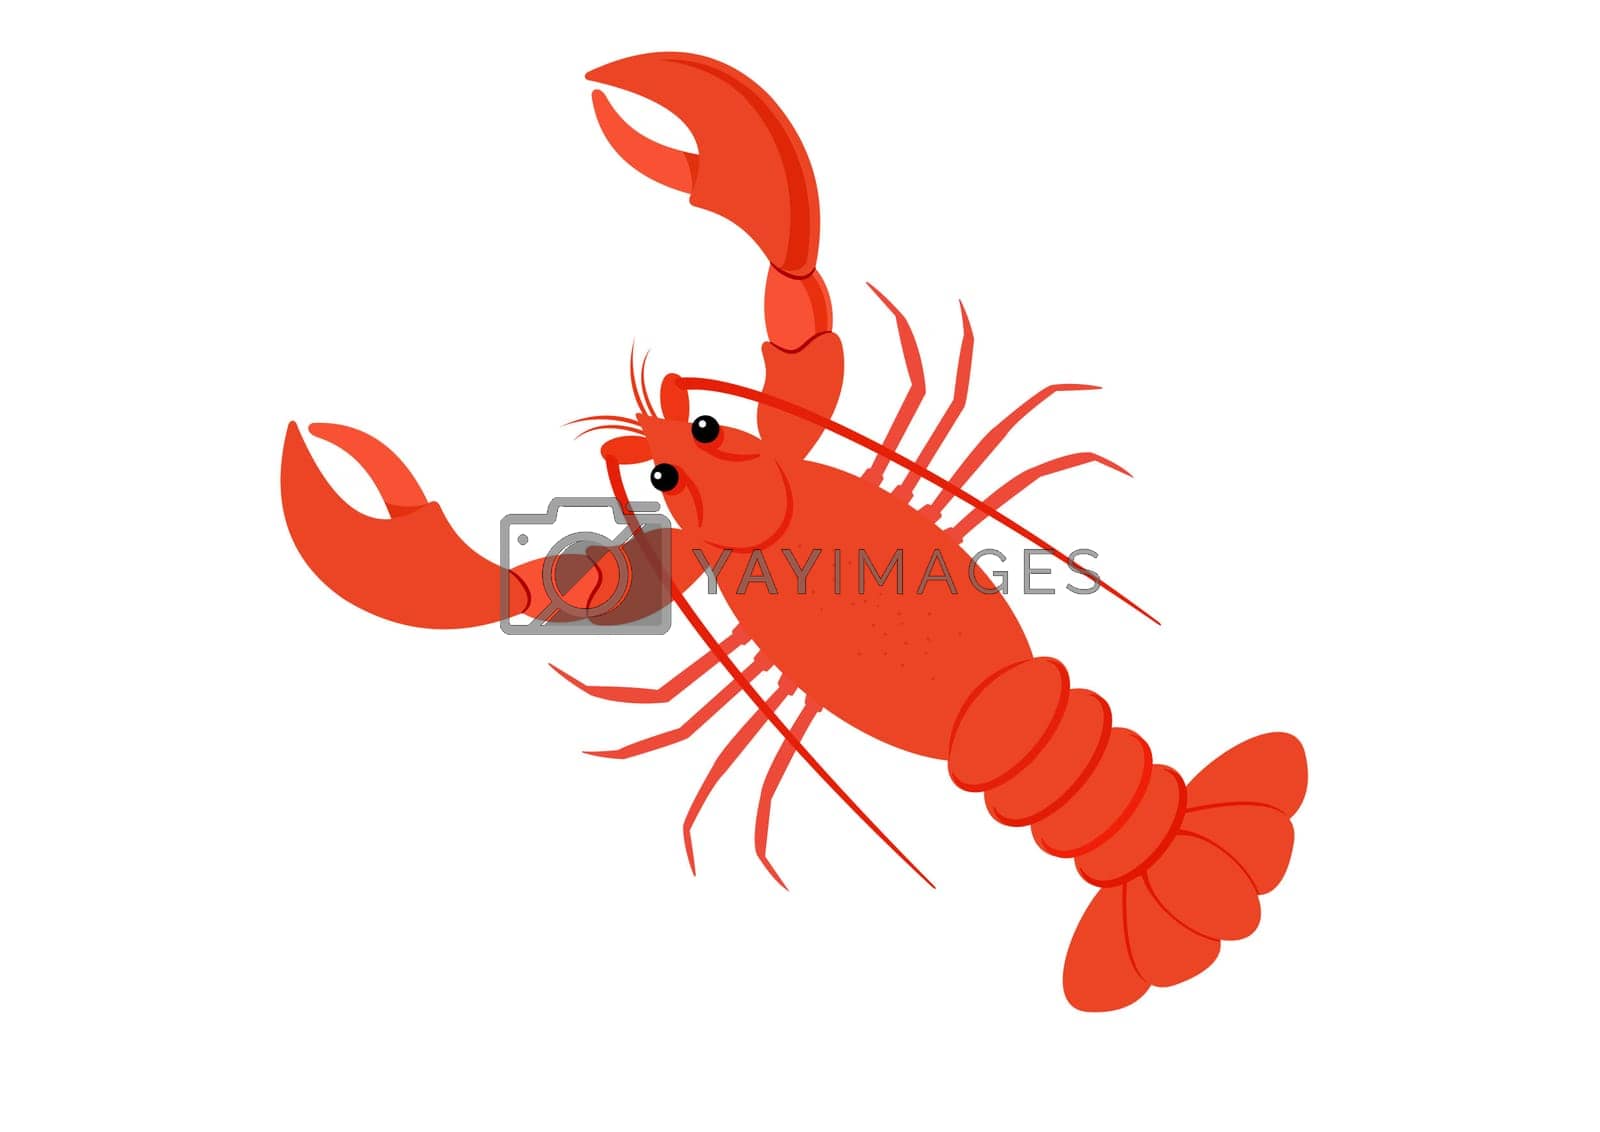 Royalty free image of Cartoon Lobster in flat style. Vector illustration of lobster isolated on white background by mihaigr10